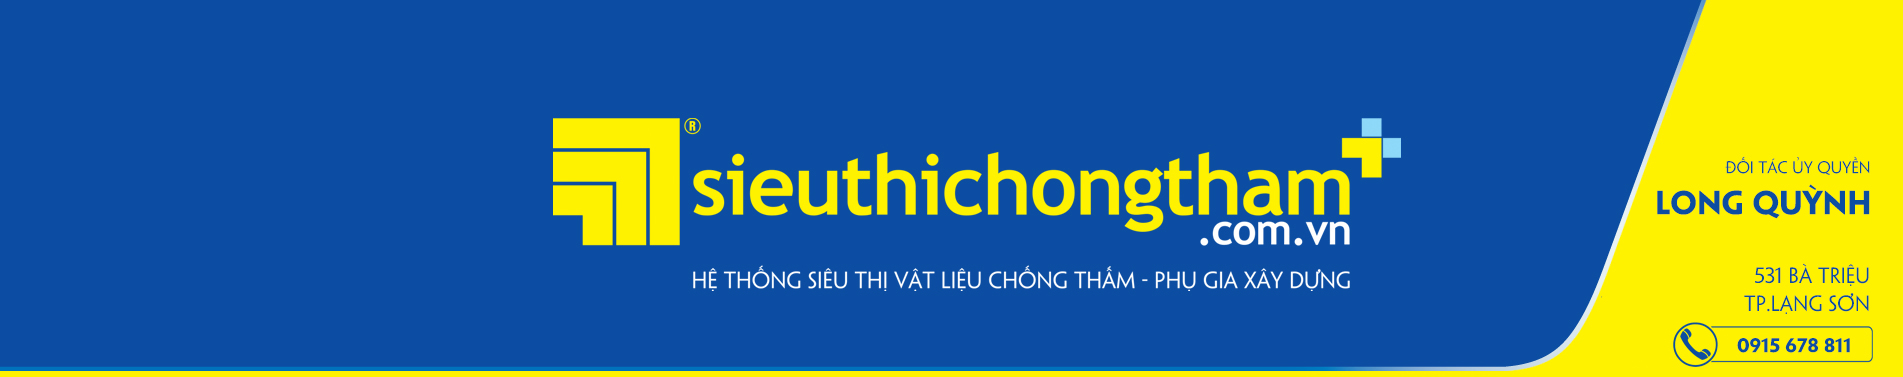 Long Quynh Banner